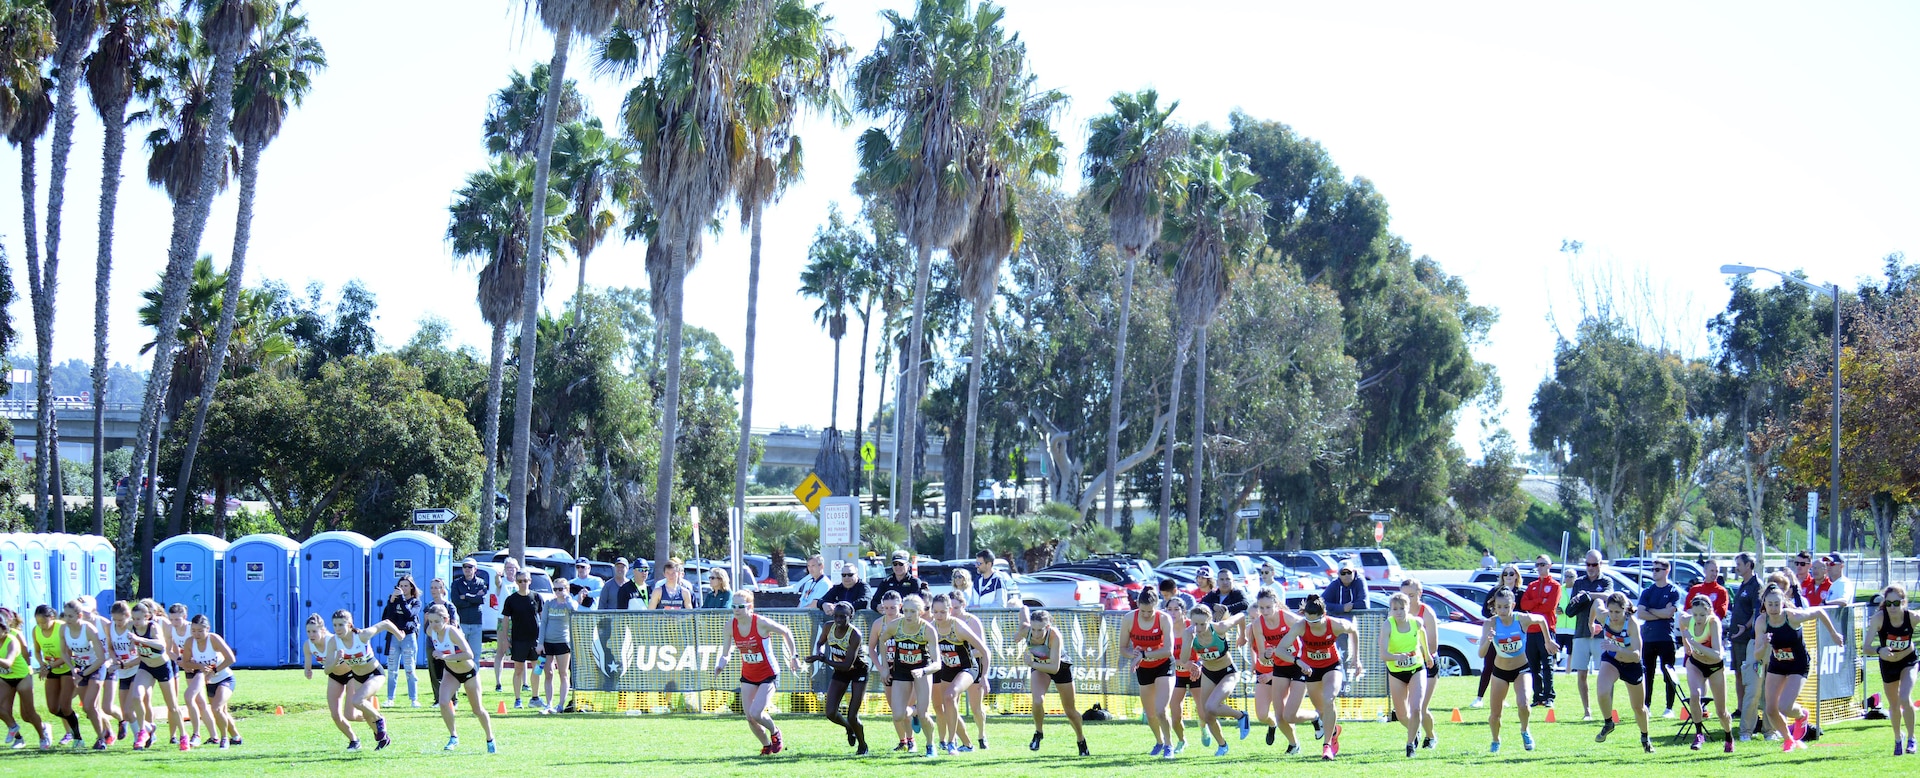 Runners begin the women's Armed Forces Cross Country Championship, run in conjunction with the USA Track and Field Cross Country Championships senior women 10K race at Mision Bay Park in San Diego, Calif., Jan. 18, 2019.